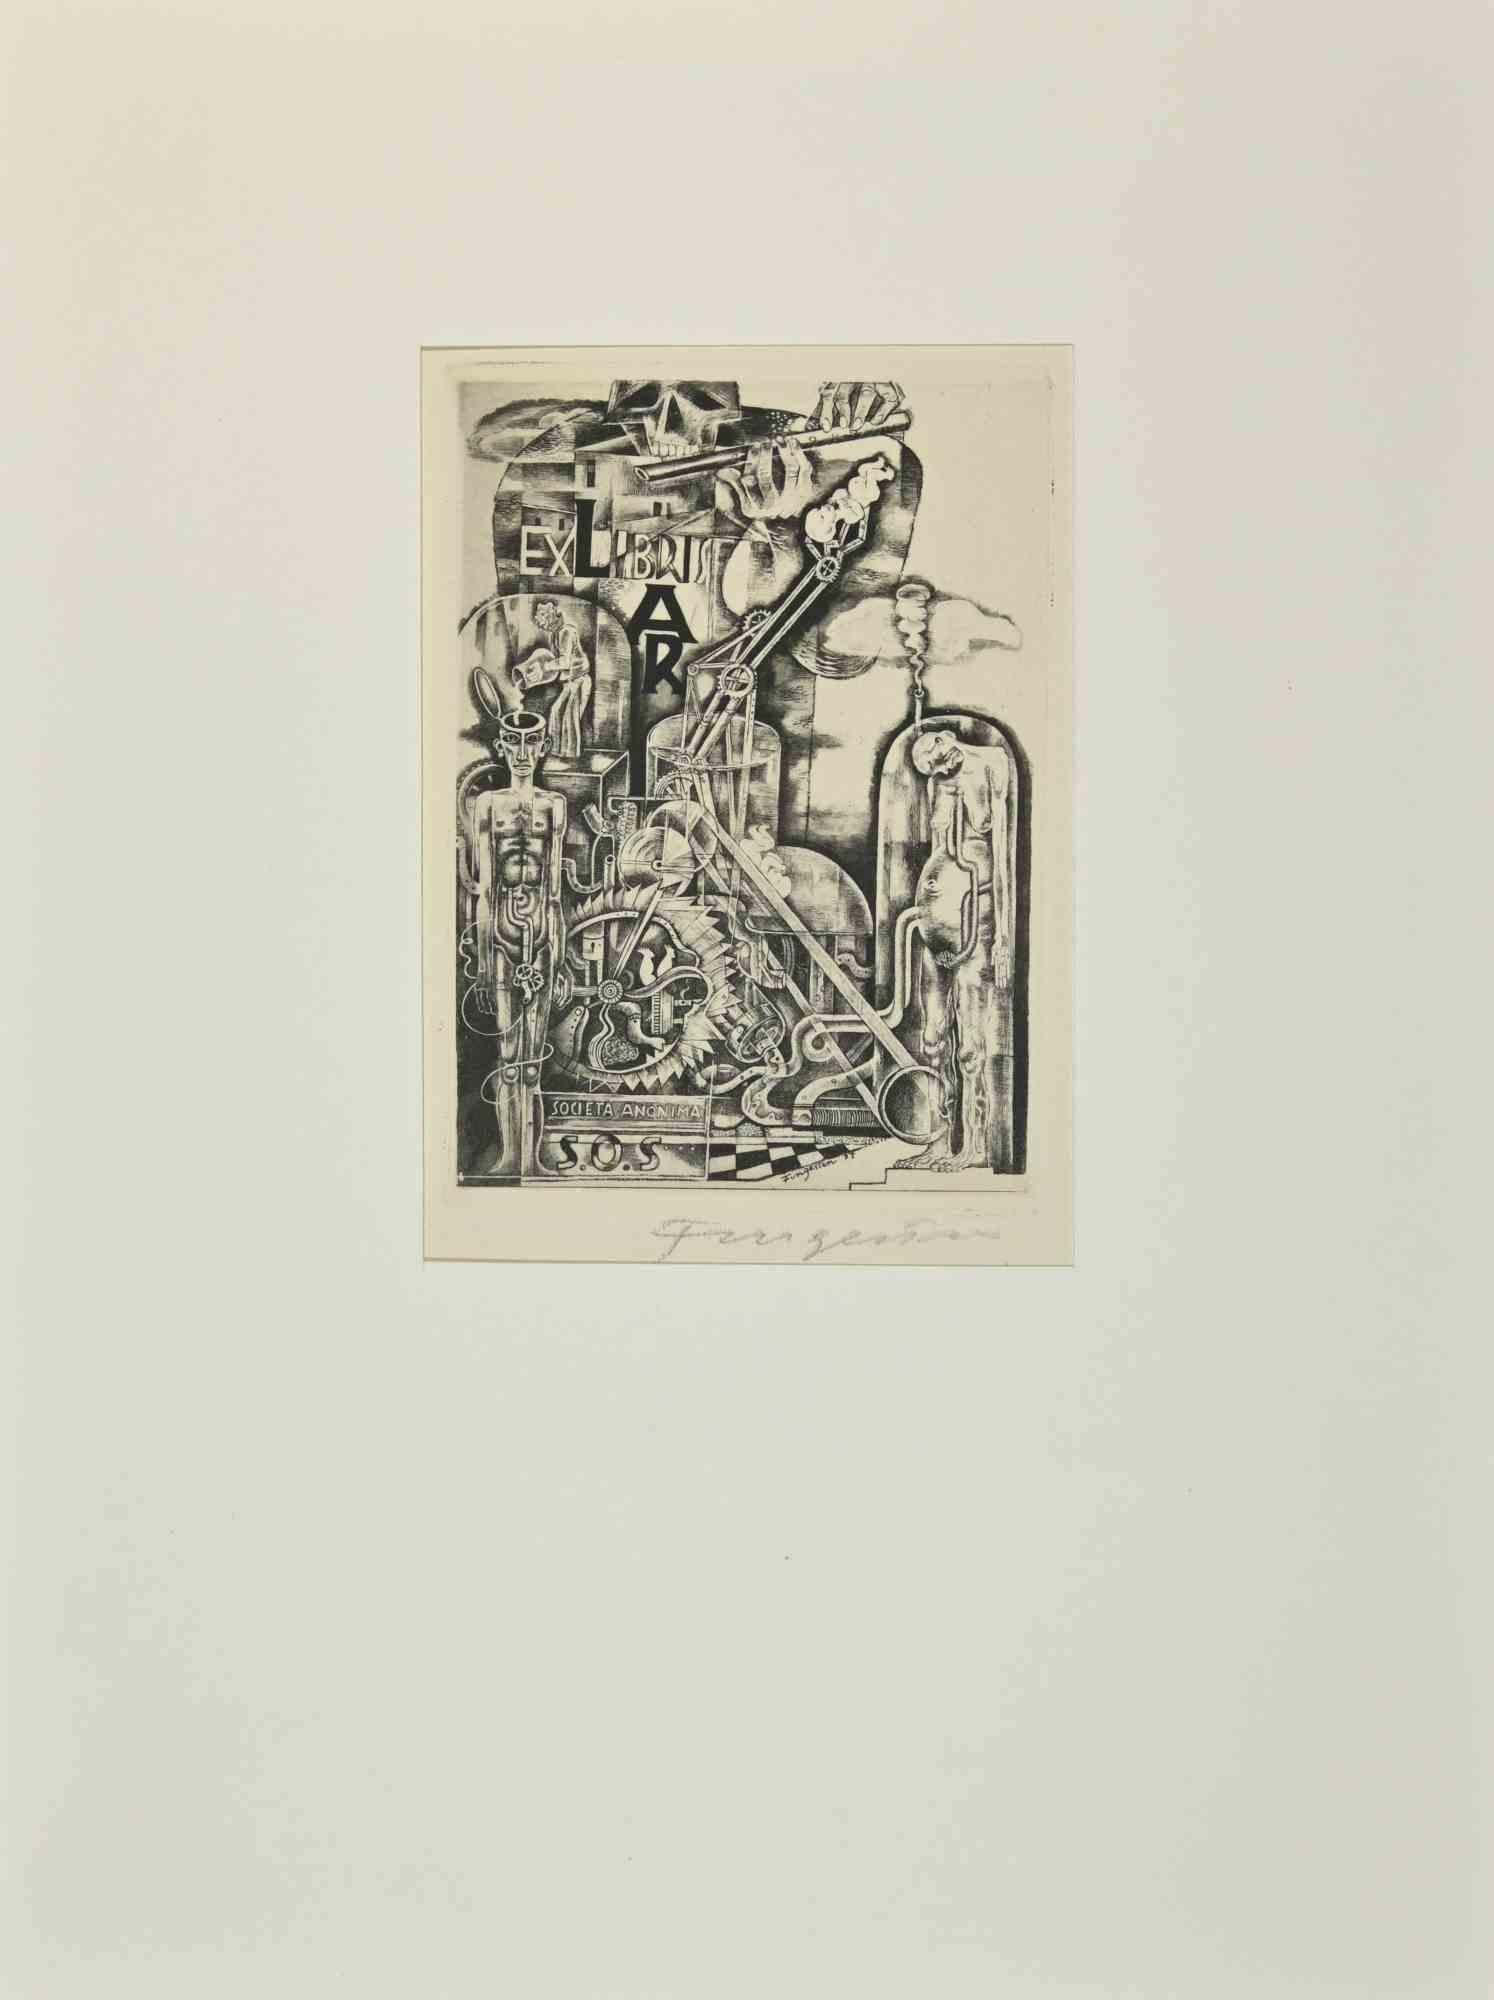 Ex Libris is an Etching print created by  Michel Fingesten in 1937.

Hand Signed on the lower right margin.

The work is glued on cardboard.

Total dimensions: 32.5 x 24 cm.

Very Good condition.

Michel Fingesten (1884 - 1943) was a Czech painter